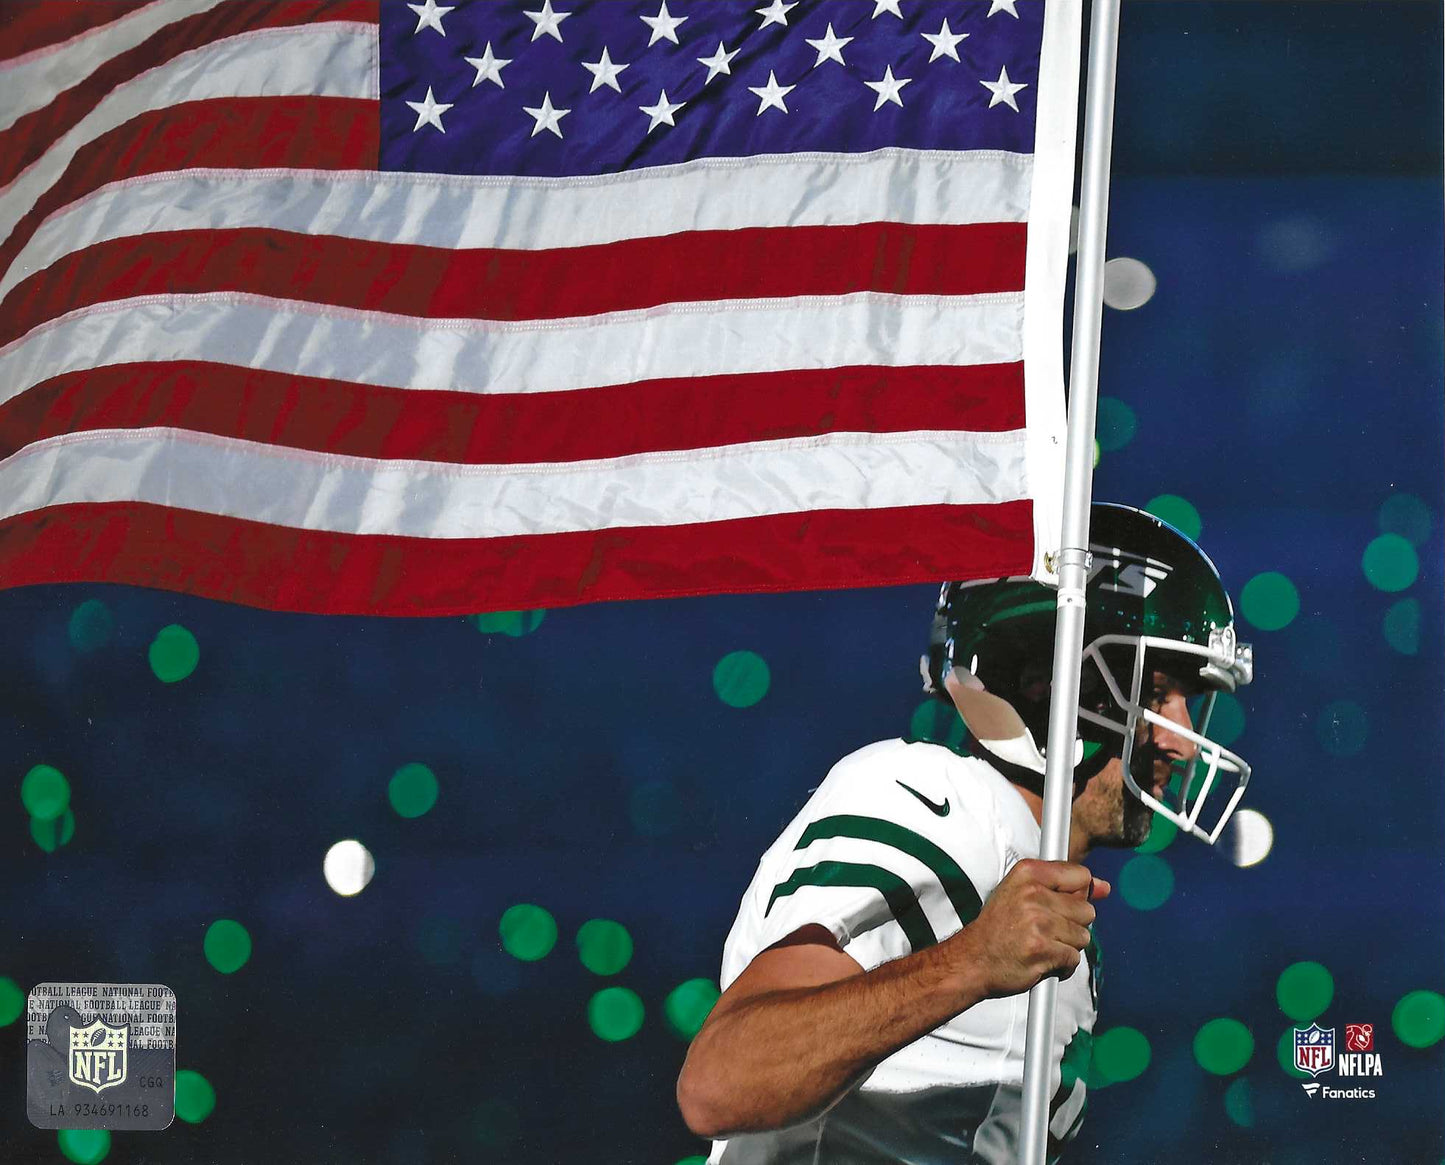 New York Jets Aaron Rogers Enters The Field With The American Flag 8x10 Photo